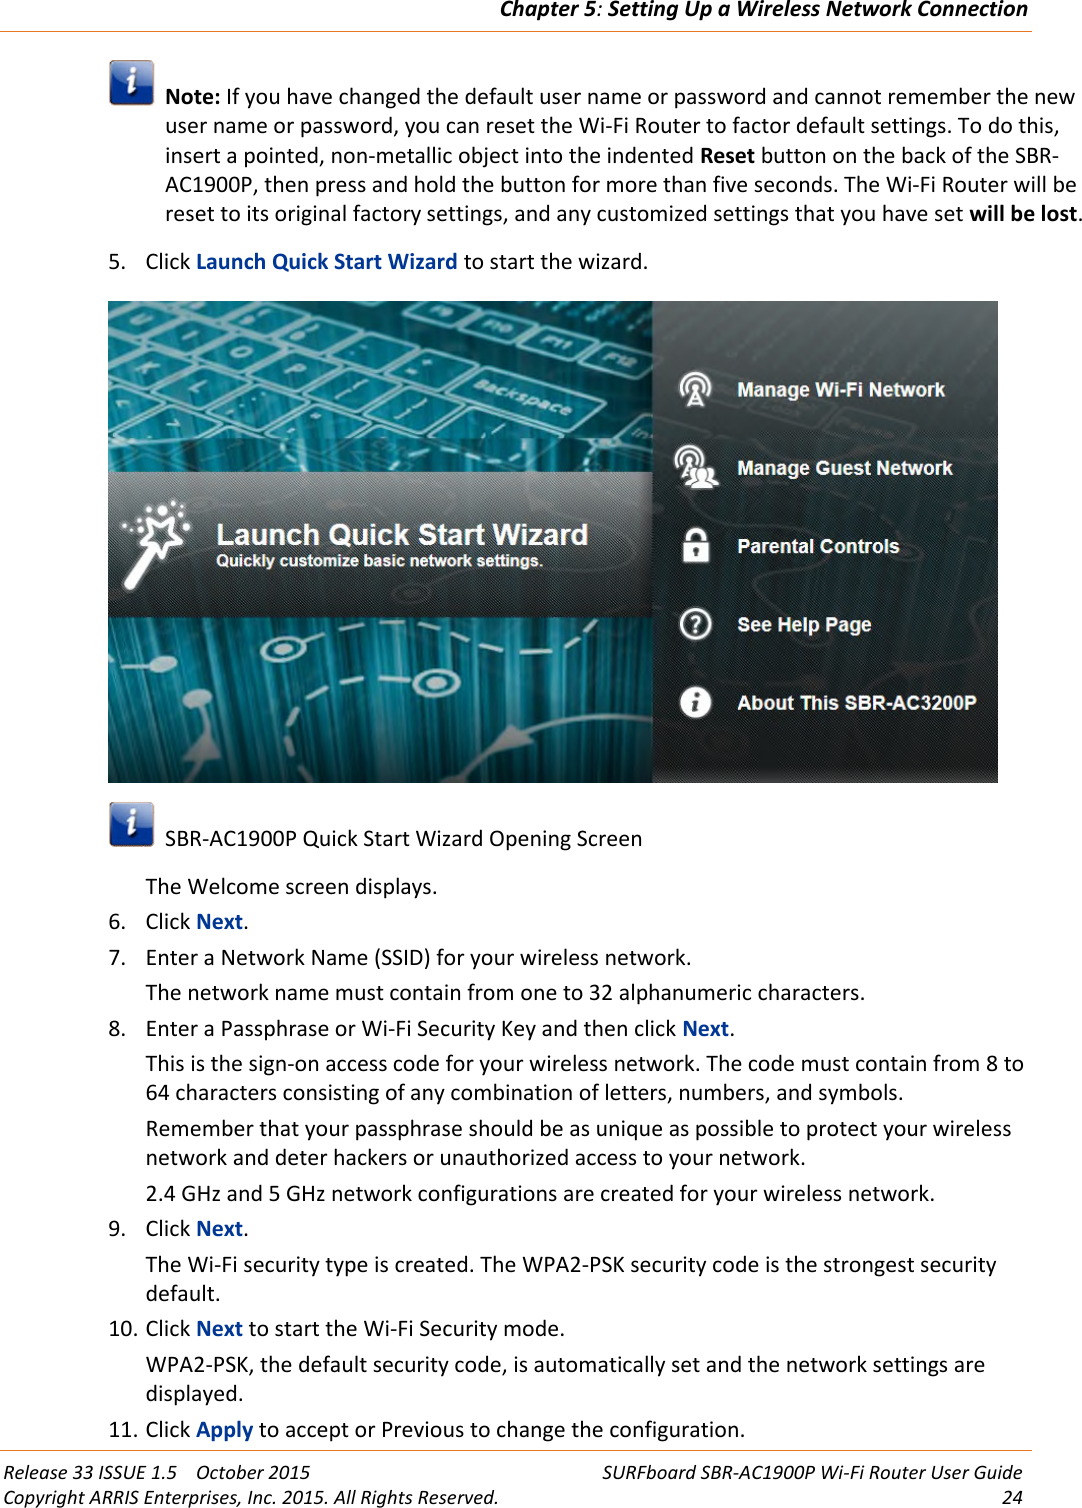 Chapter 5:Setting Up a Wireless Network ConnectionRelease 33 ISSUE 1.5 October 2015 SURFboard SBR-AC1900P Wi-Fi Router User GuideCopyright ARRIS Enterprises, Inc. 2015. All Rights Reserved. 24Note: If you have changed the default user name or password and cannot remember the newuser name or password, you can reset the Wi-Fi Router to factor default settings. To do this,insert a pointed, non-metallic object into the indented Reset button on the back of the SBR-AC1900P, then press and hold the button for more than five seconds. The Wi-Fi Router will bereset to its original factory settings, and any customized settings that you have set will be lost.5. Click Launch Quick Start Wizard to start the wizard.SBR-AC1900P Quick Start Wizard Opening ScreenThe Welcome screen displays.6. Click Next.7. Enter a Network Name (SSID) for your wireless network.The network name must contain from one to 32 alphanumeric characters.8. Enter a Passphrase or Wi-Fi Security Key and then click Next.This is the sign-on access code for your wireless network. The code must contain from 8 to64 characters consisting of any combination of letters, numbers, and symbols.Remember that your passphrase should be as unique as possible to protect your wirelessnetwork and deter hackers or unauthorized access to your network.2.4 GHz and 5 GHz network configurations are created for your wireless network.9. Click Next.The Wi-Fi security type is created. The WPA2-PSK security code is the strongest securitydefault.10. Click Next to start the Wi-Fi Security mode.WPA2-PSK, the default security code, is automatically set and the network settings aredisplayed.11. Click Apply to accept or Previous to change the configuration.